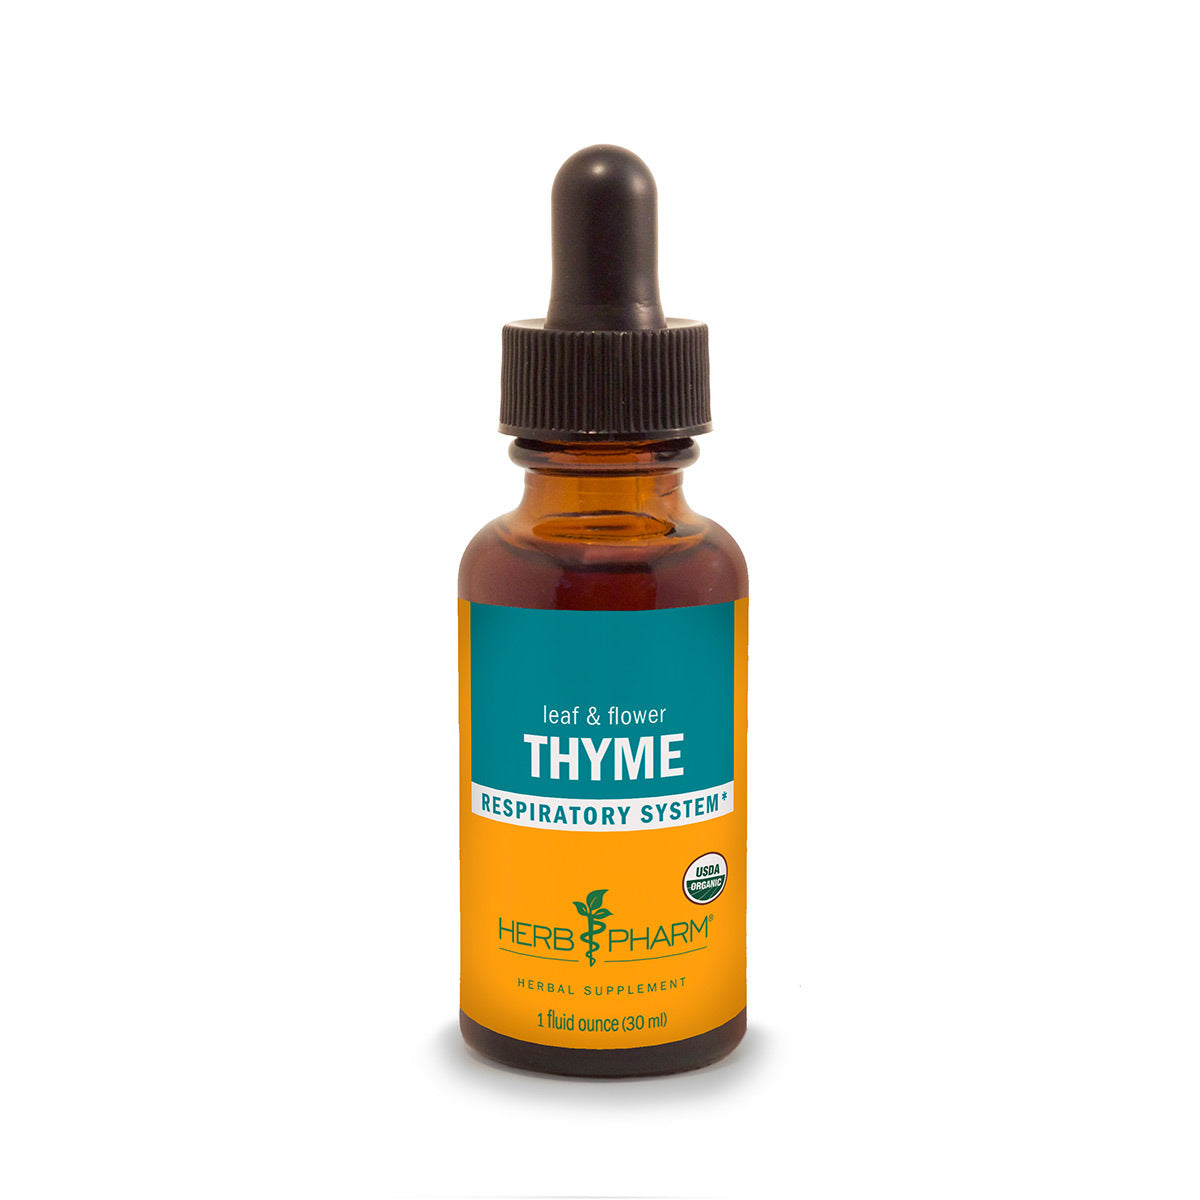 Primary image of Thyme Extract